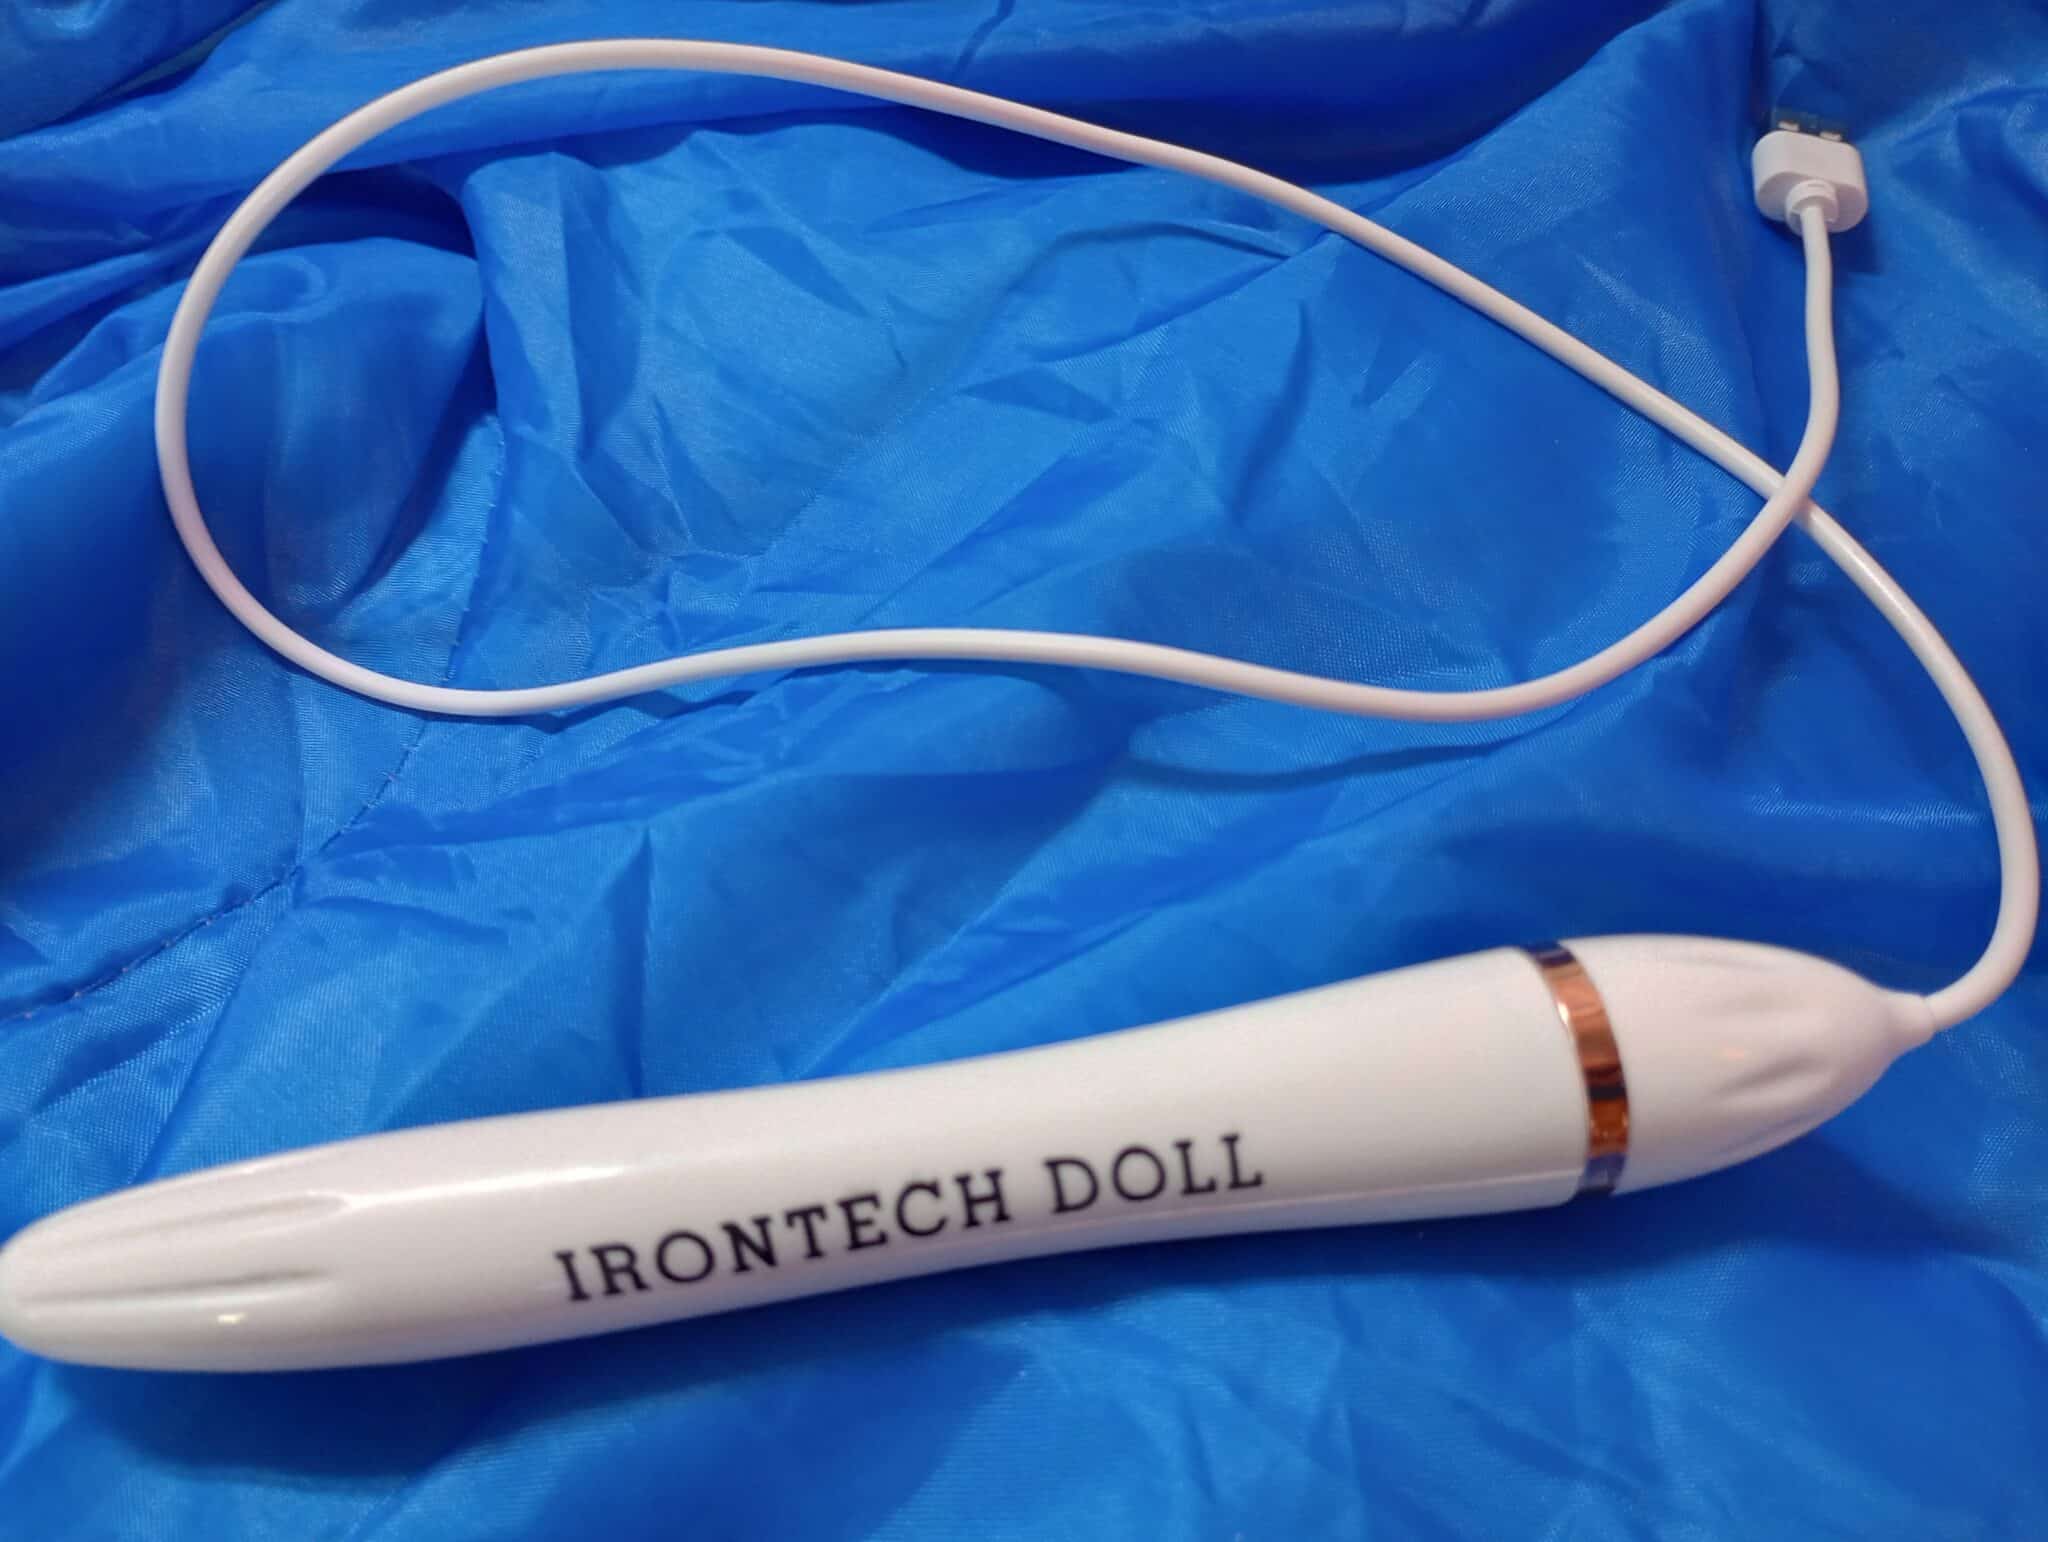 Scarlet Elf Irontech Doll The Scarlet Elf Irontech Doll: Does it Deliver on Performance?